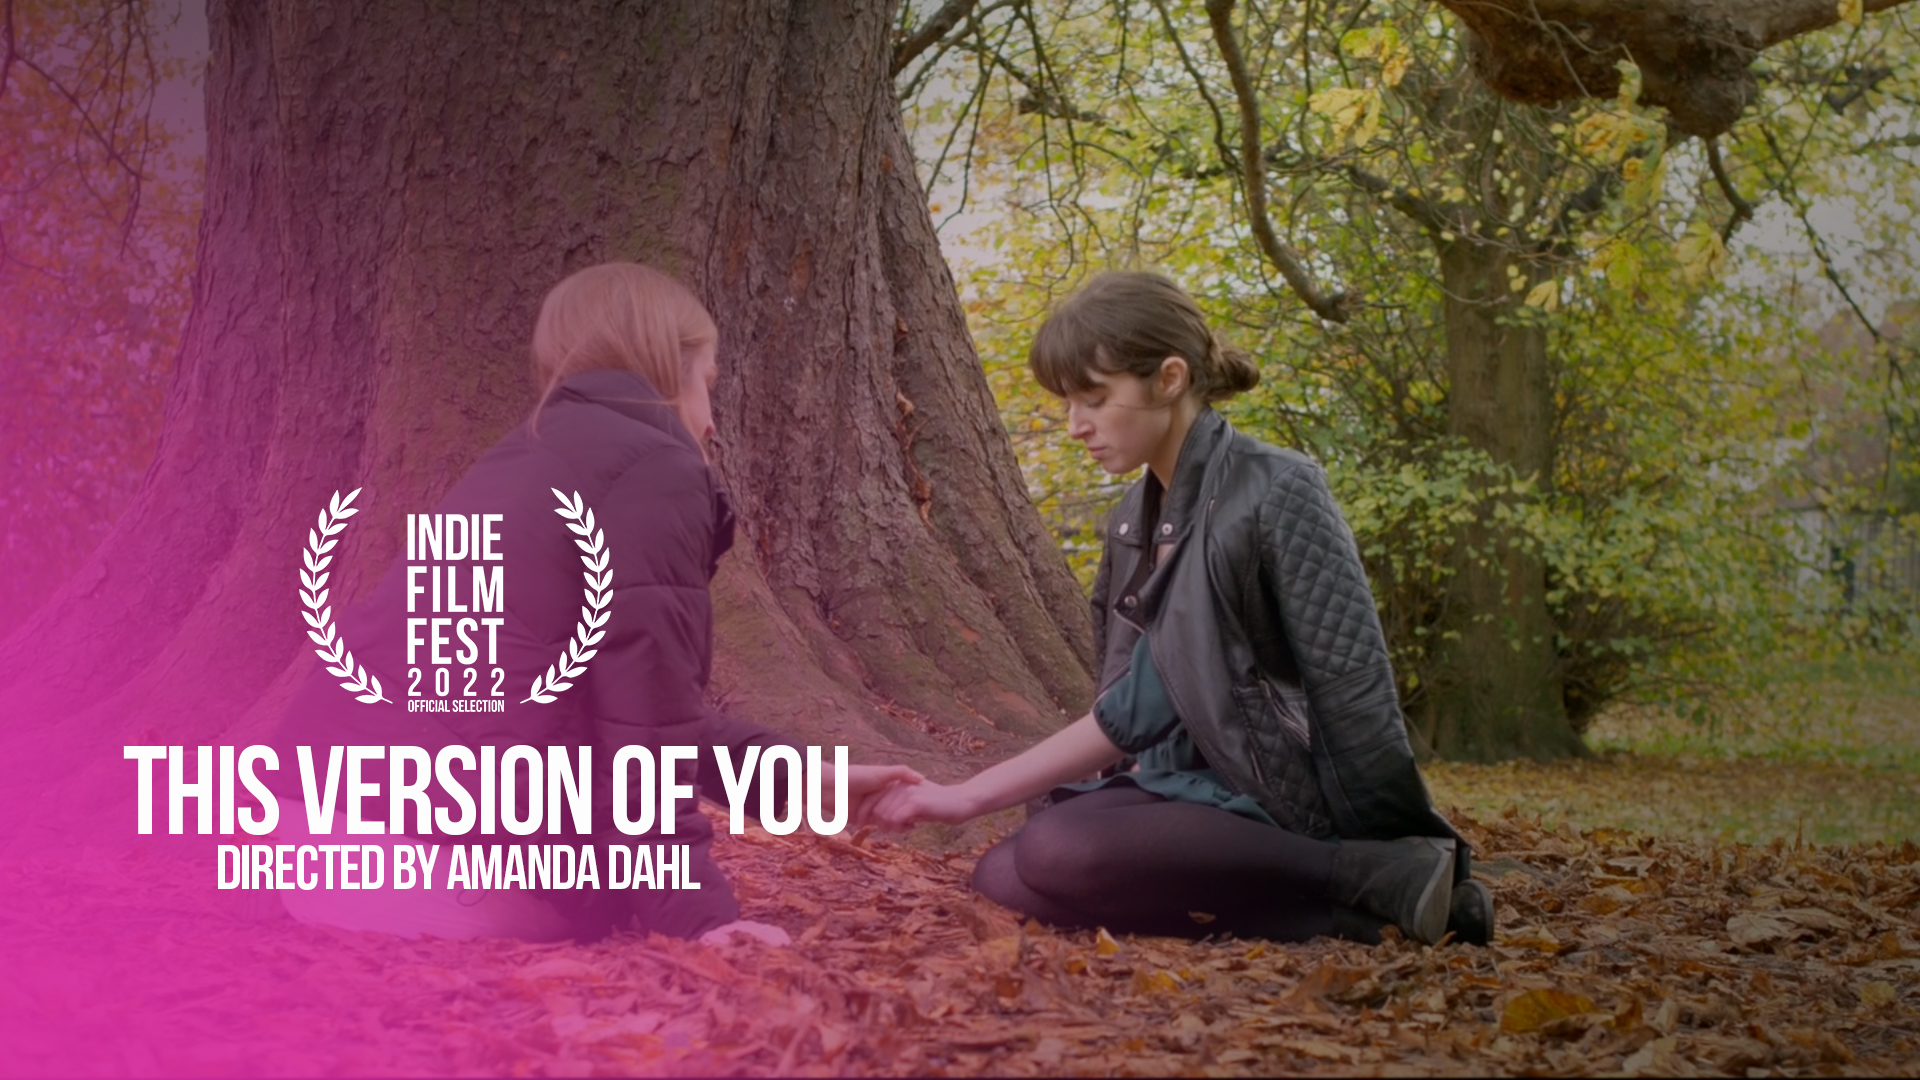 Thisversionofyou-OfficialSelection-2022